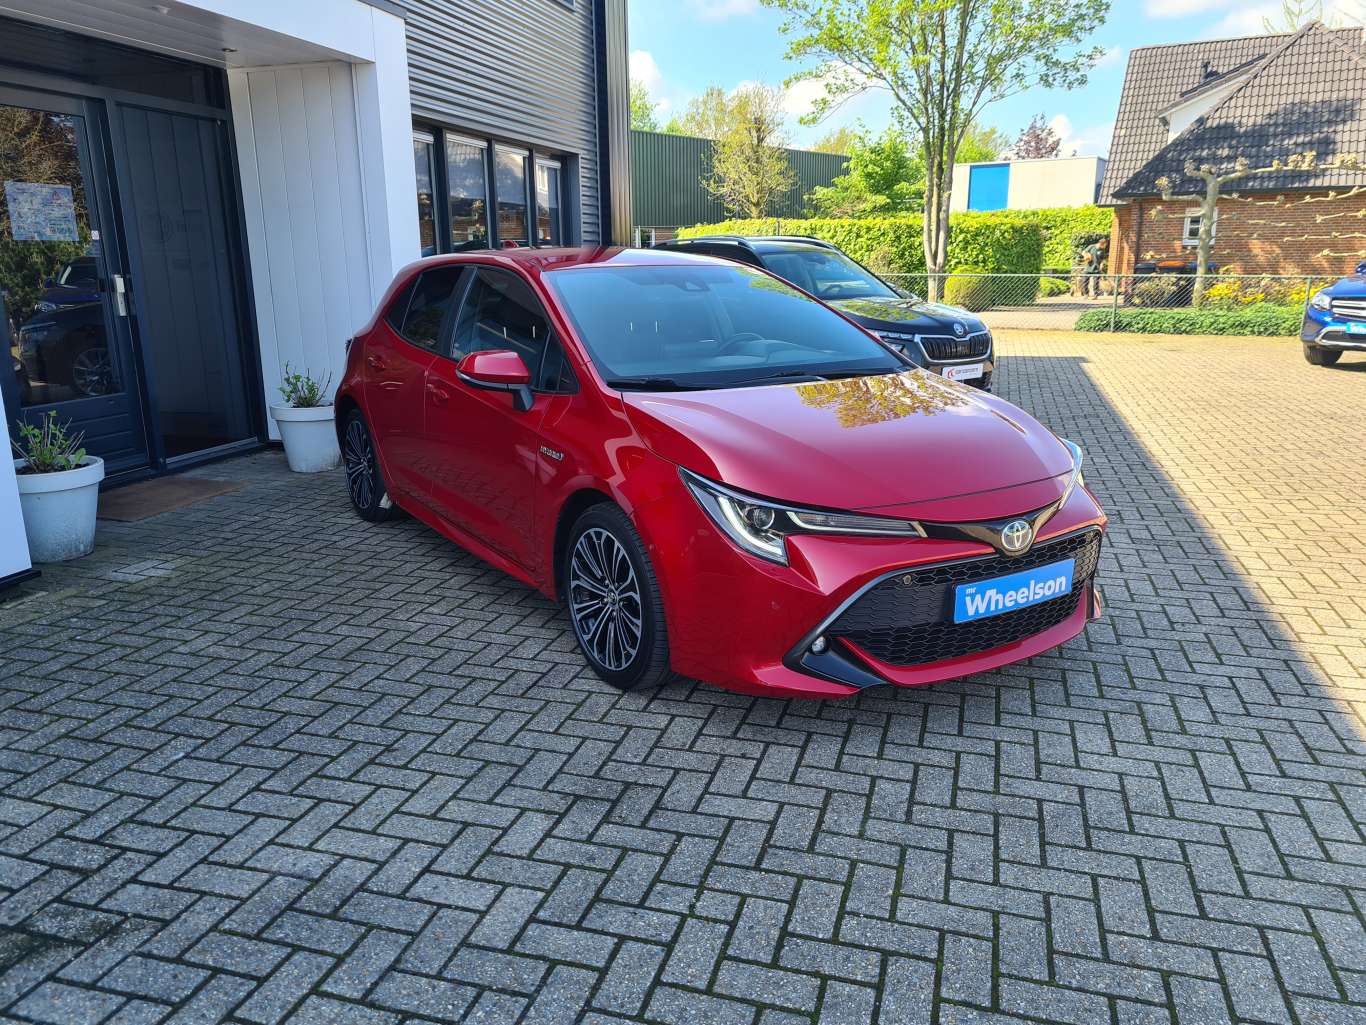 toyota-corolla-hybrid-occasion-import-mrweelson-lease-schuin-voor